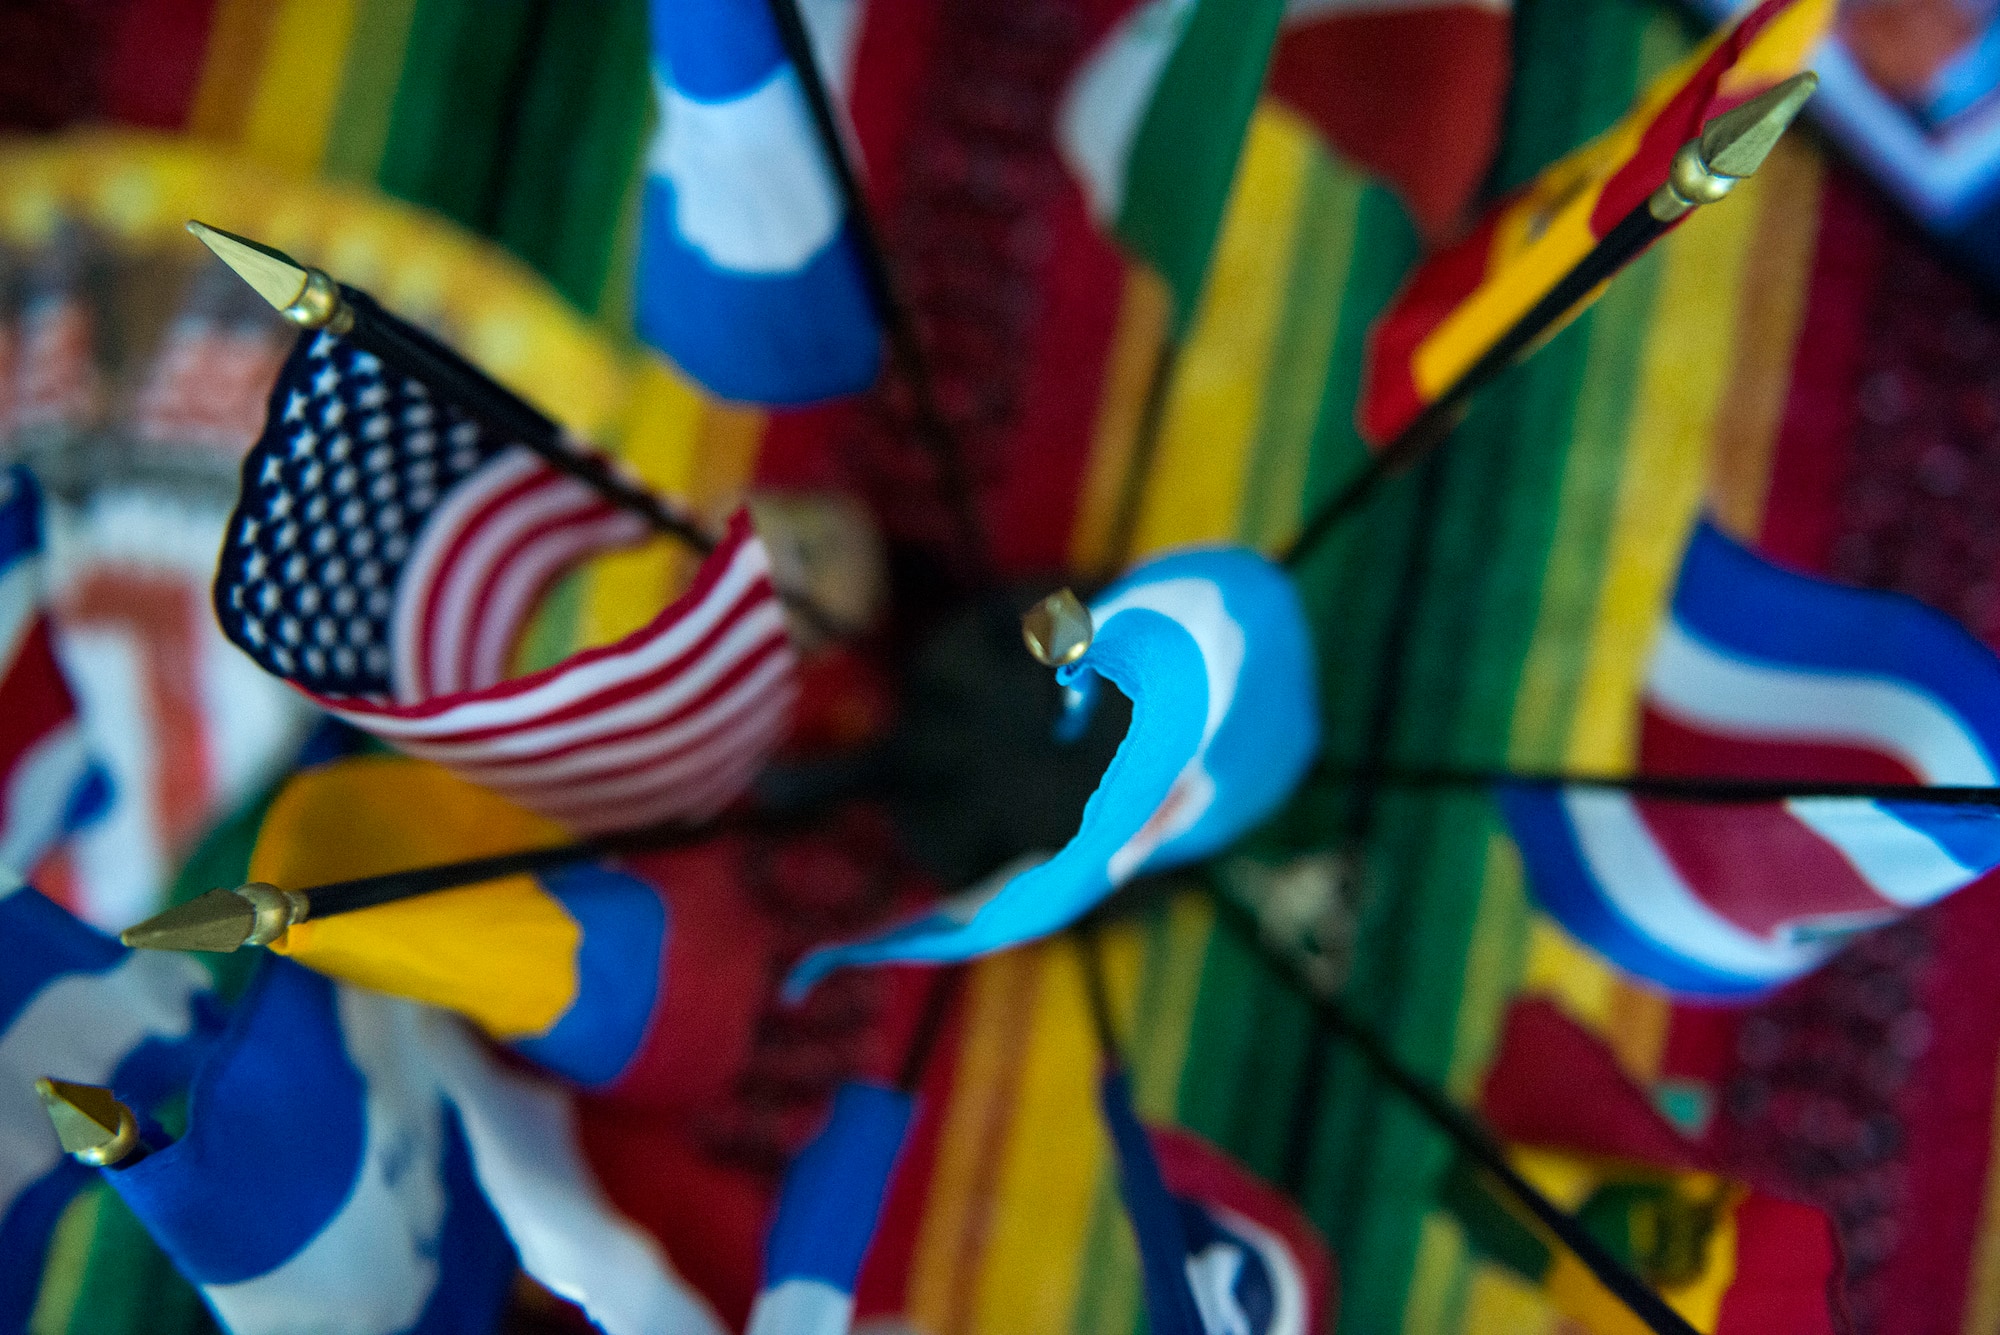 Flags rest on display during the 23d Wing Diversity Day, Sept. 14, 2018, at Moody Air Force Base, Ga. Diversity Day honored the cultures of all groups and organizations observed by the Department of Defense using forms of expression such as poems and native dances. The theme of this year was ’Many Cultures, One Voice: Stronger Through Inclusion And Equality’. (U.S. Air Force photo by Airman 1st Class Erick Requadt)